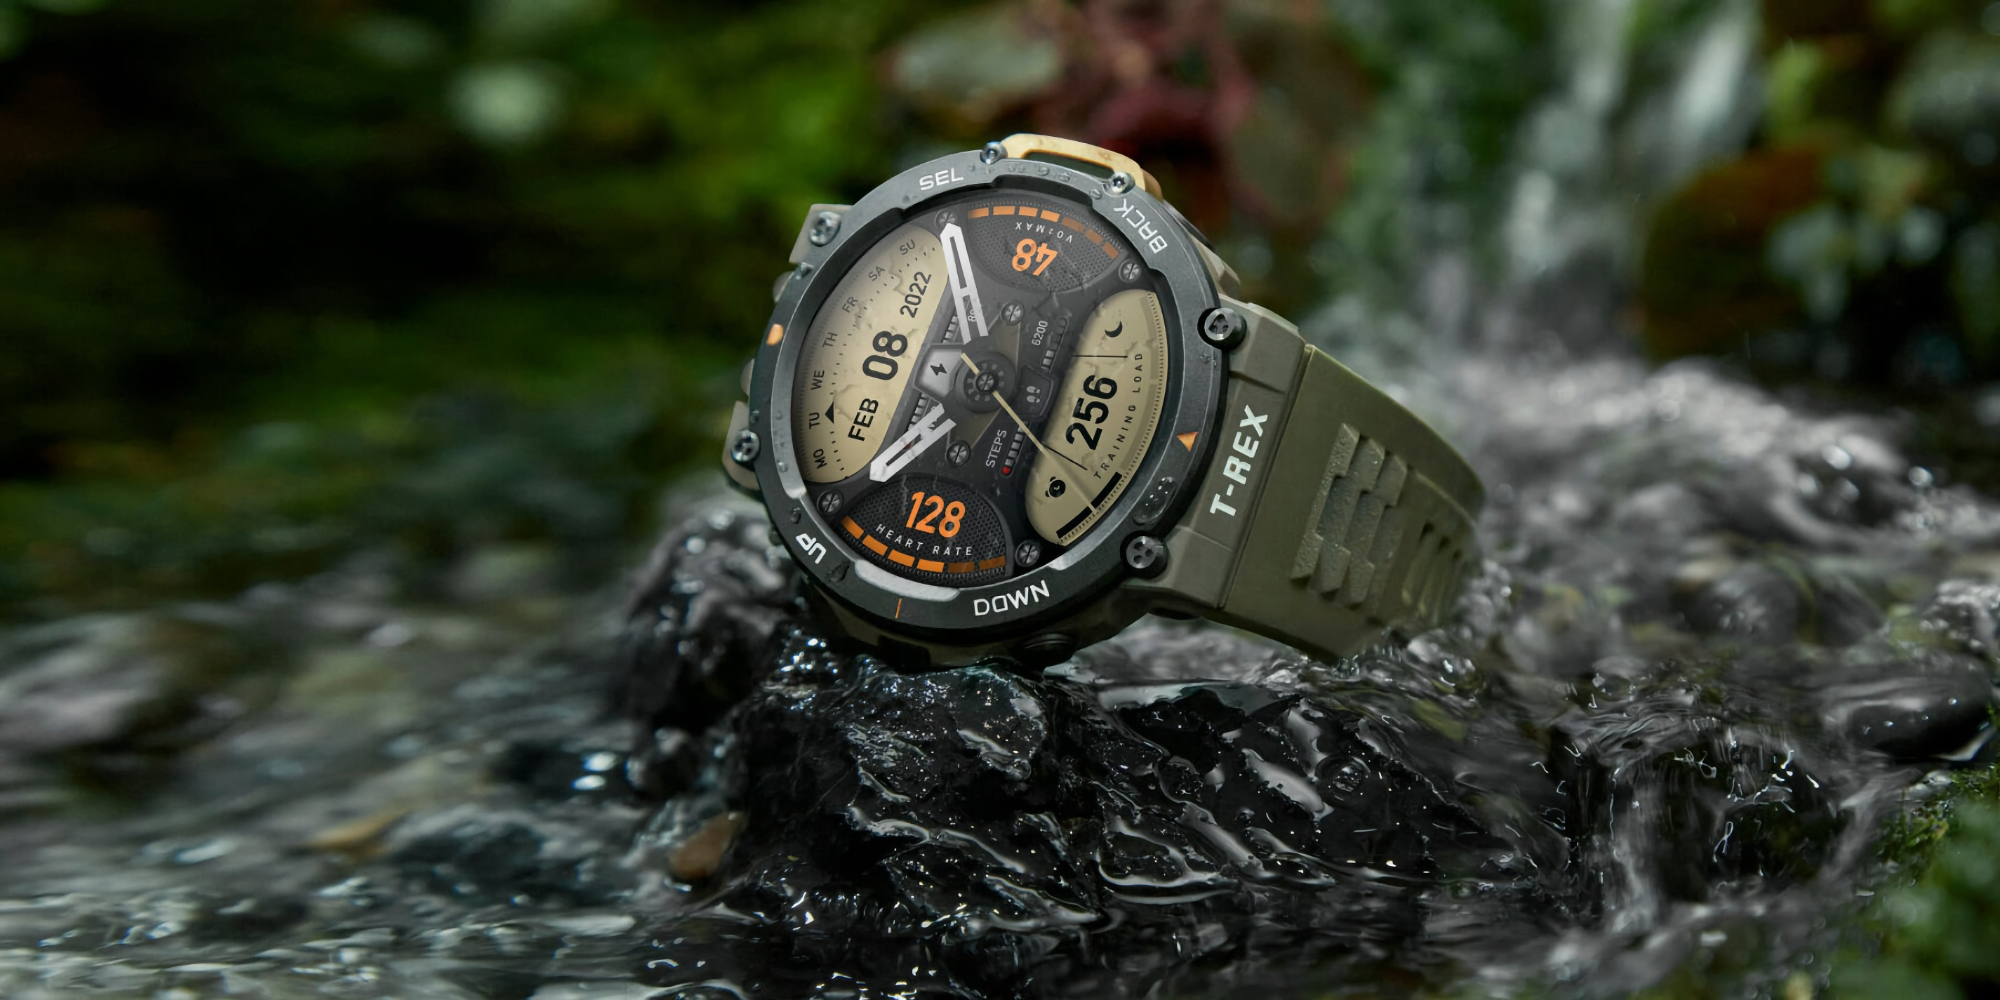 The Amazfit T-Rex 2 rugged smartwatch with up to 45 days of battery life and support for 5 global satellite positioning systems is available at Amazon for a discount